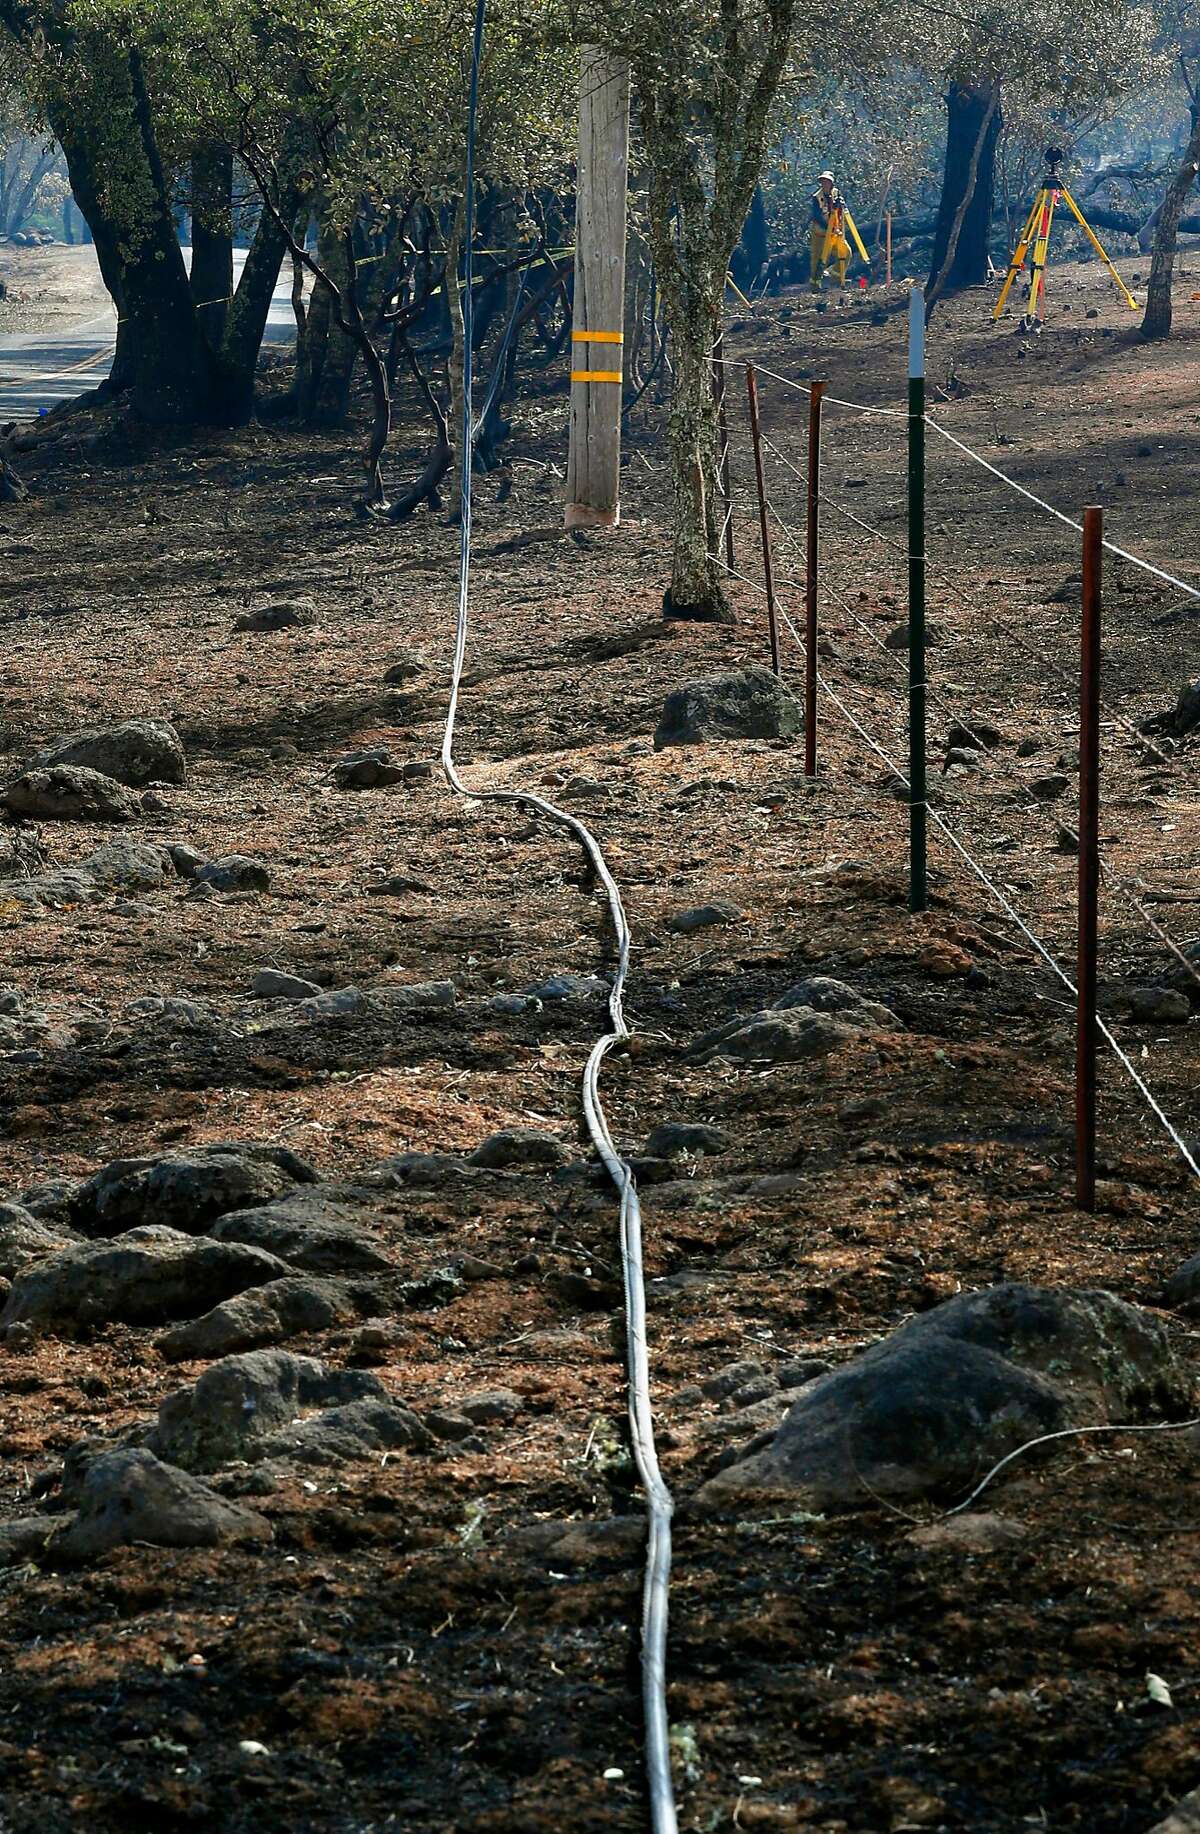 Burned power lines on the ground as investigators (background) searched for the cause of the Atlas fire east of Santa Rosa, Ca. as seen on Tuesday October 17, 2017.